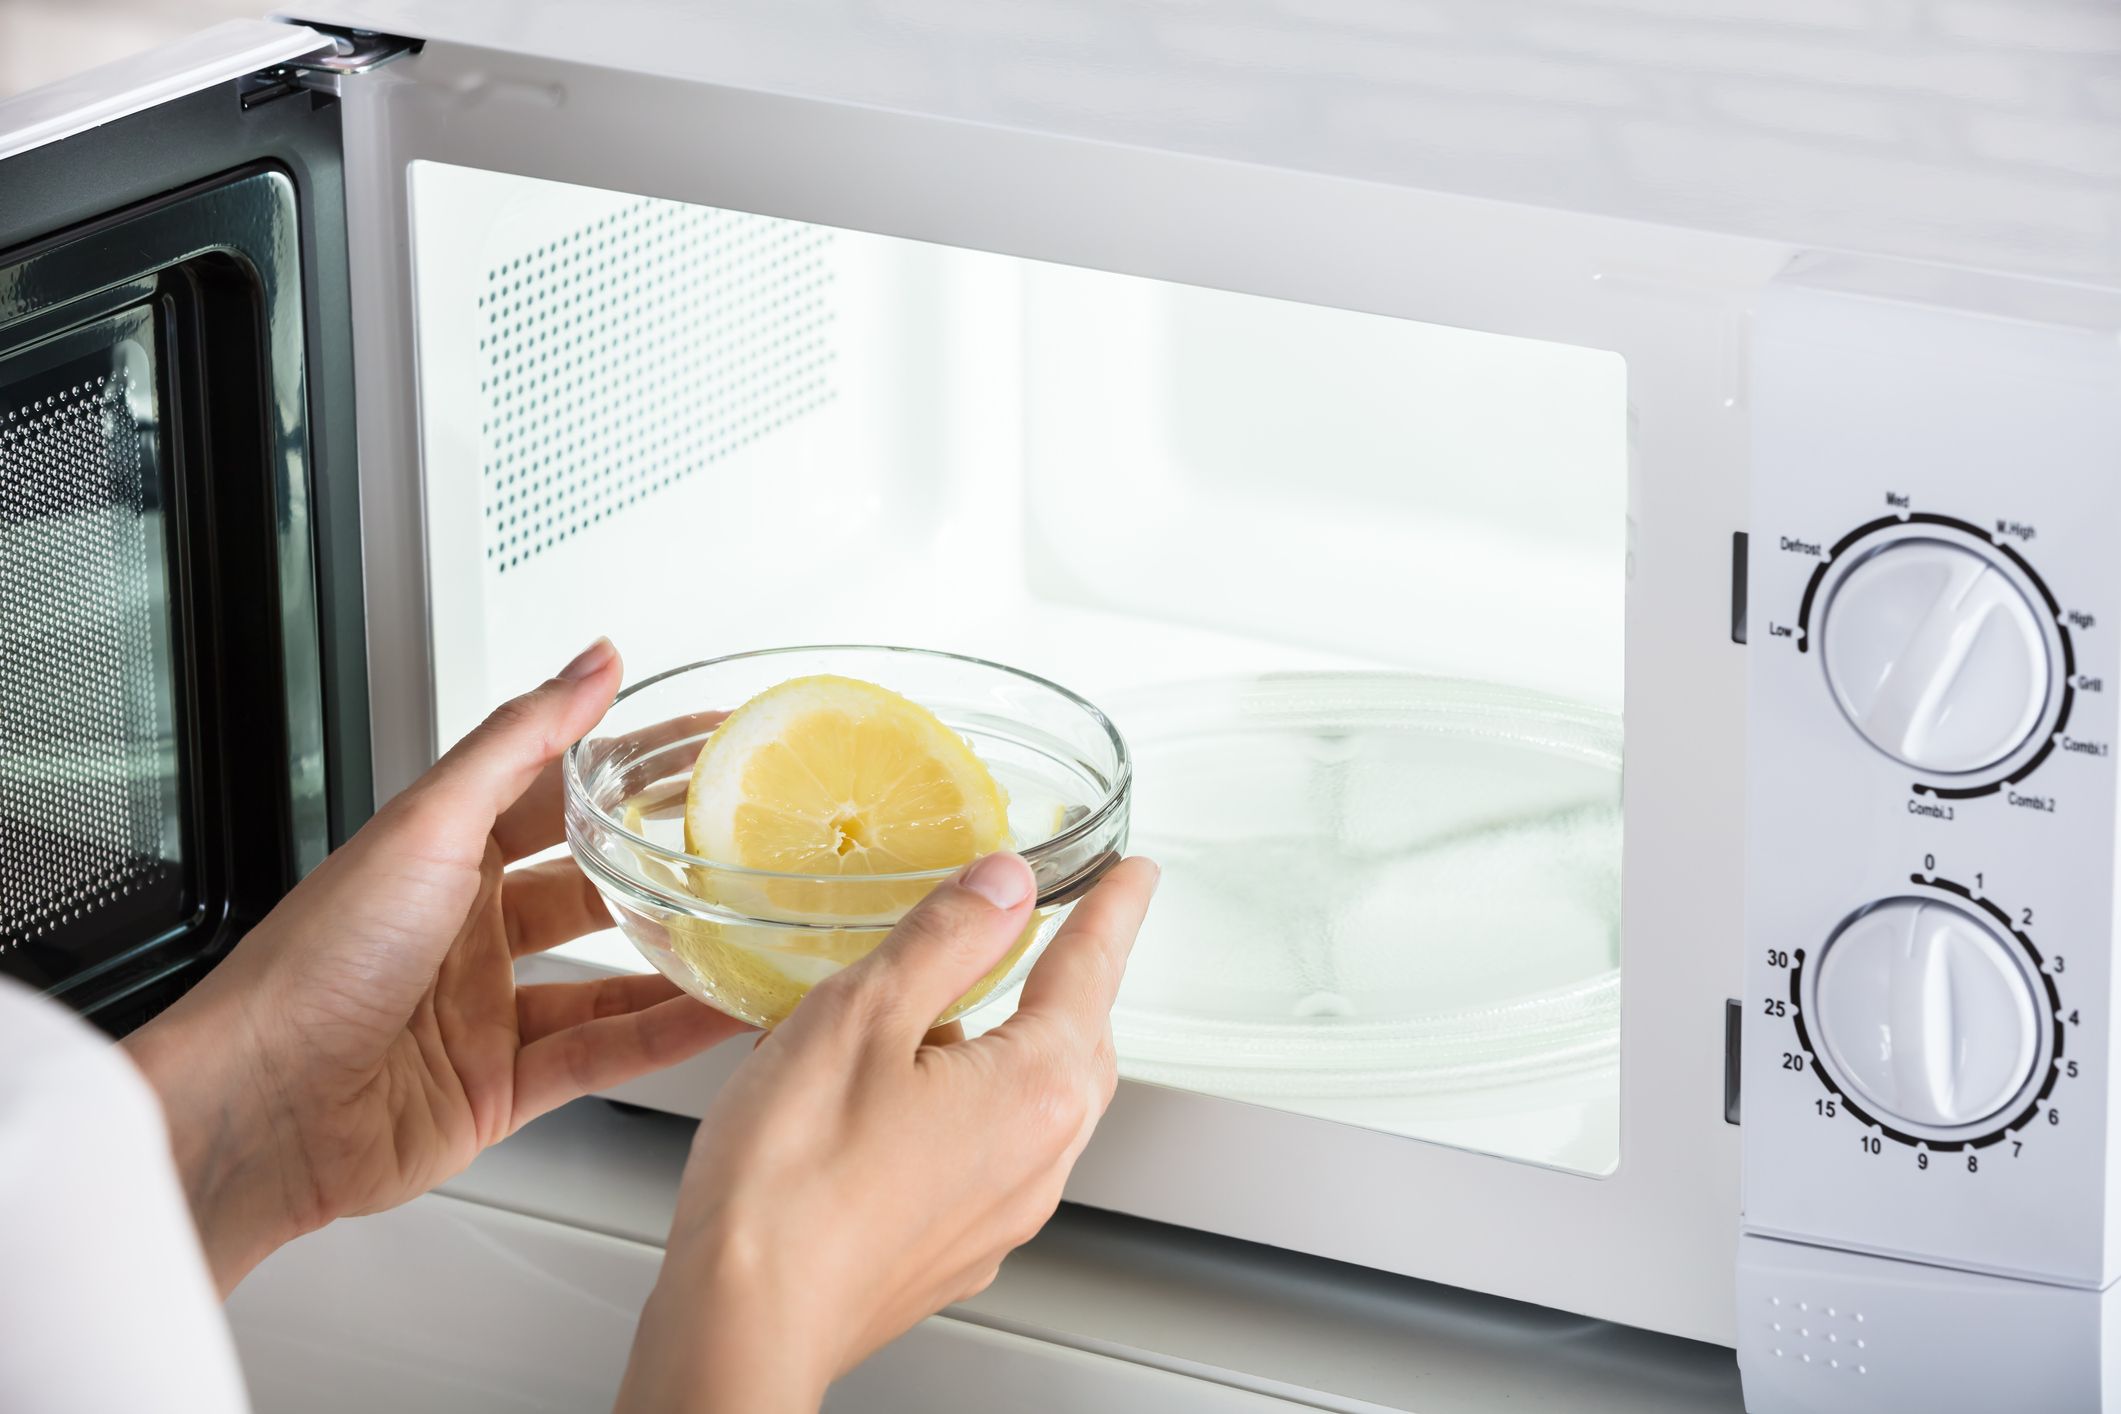 How to Clean Your Microwave: The Top 3 Microwave Cleaners 2020